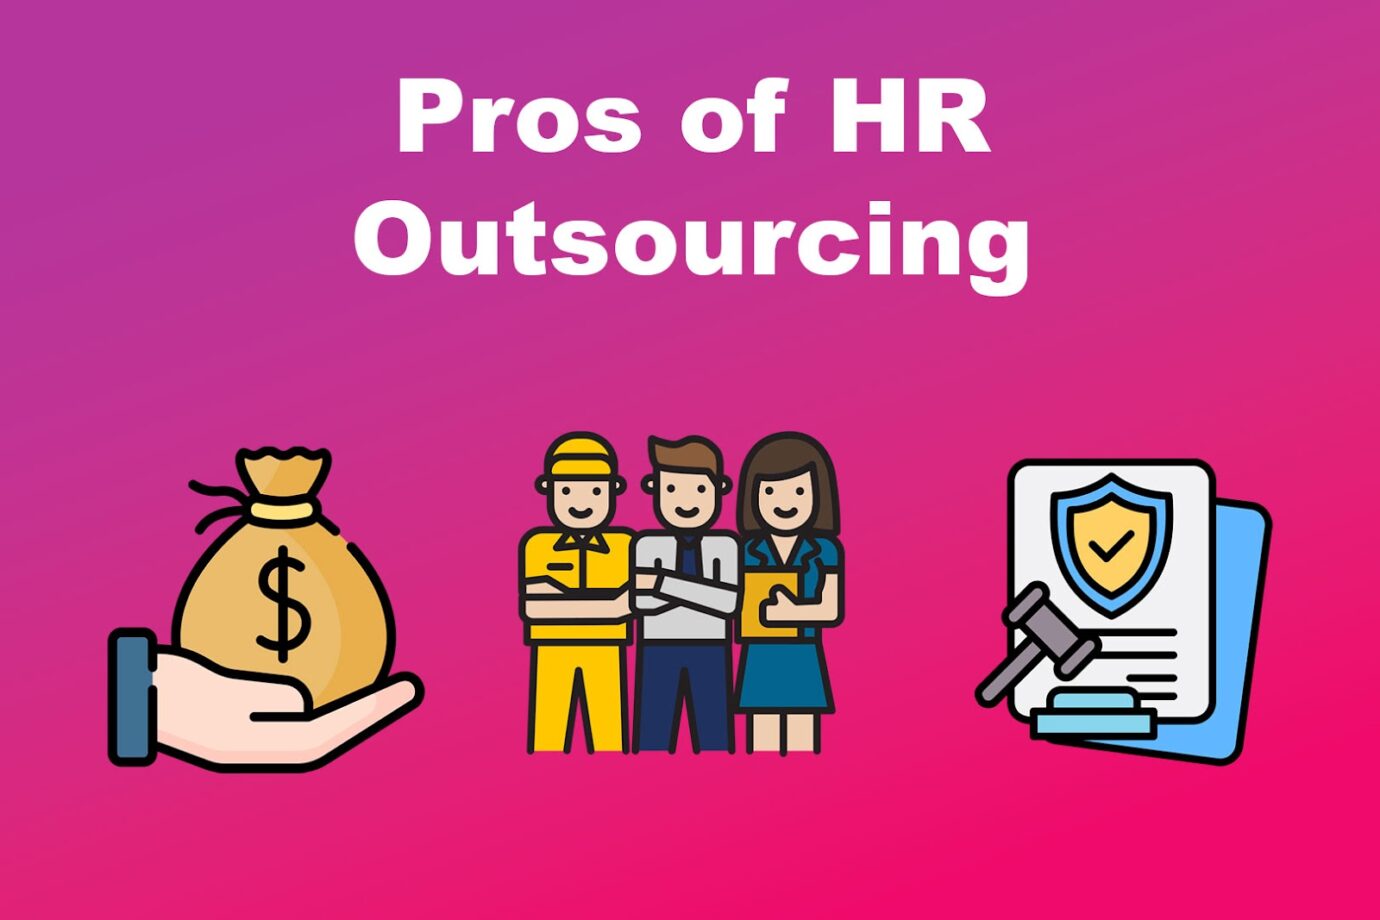 The Pros of HR Outsourcing